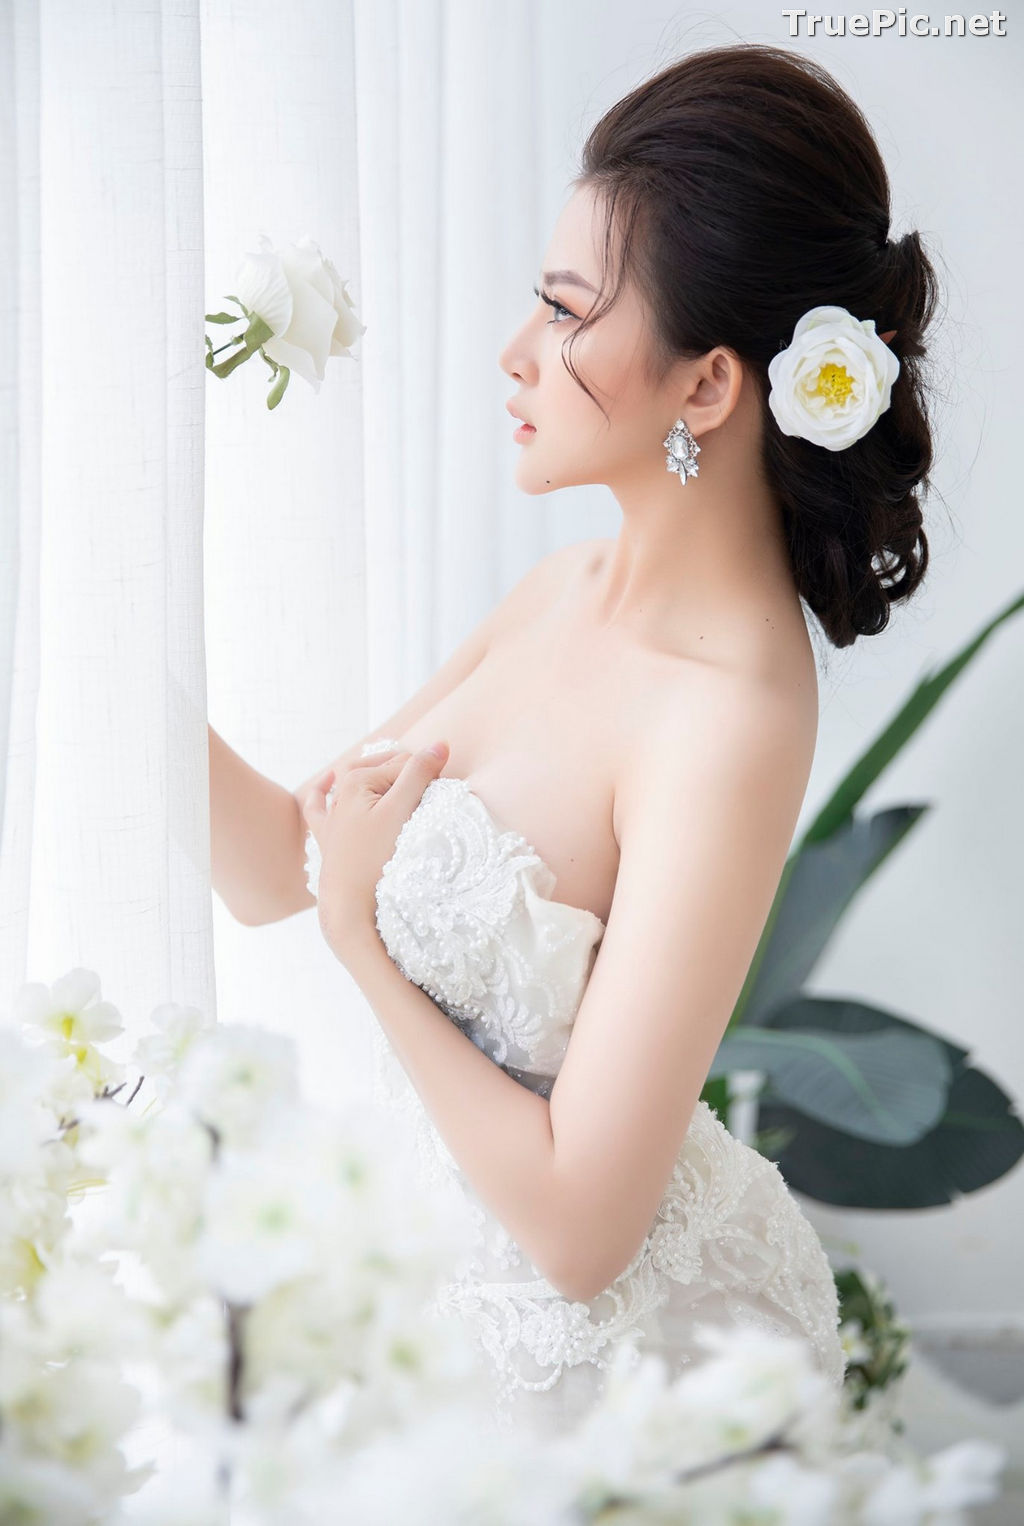 Image Vietnamese Model - Hot Beautiful Girls In White Collection - TruePic.net - Picture-31